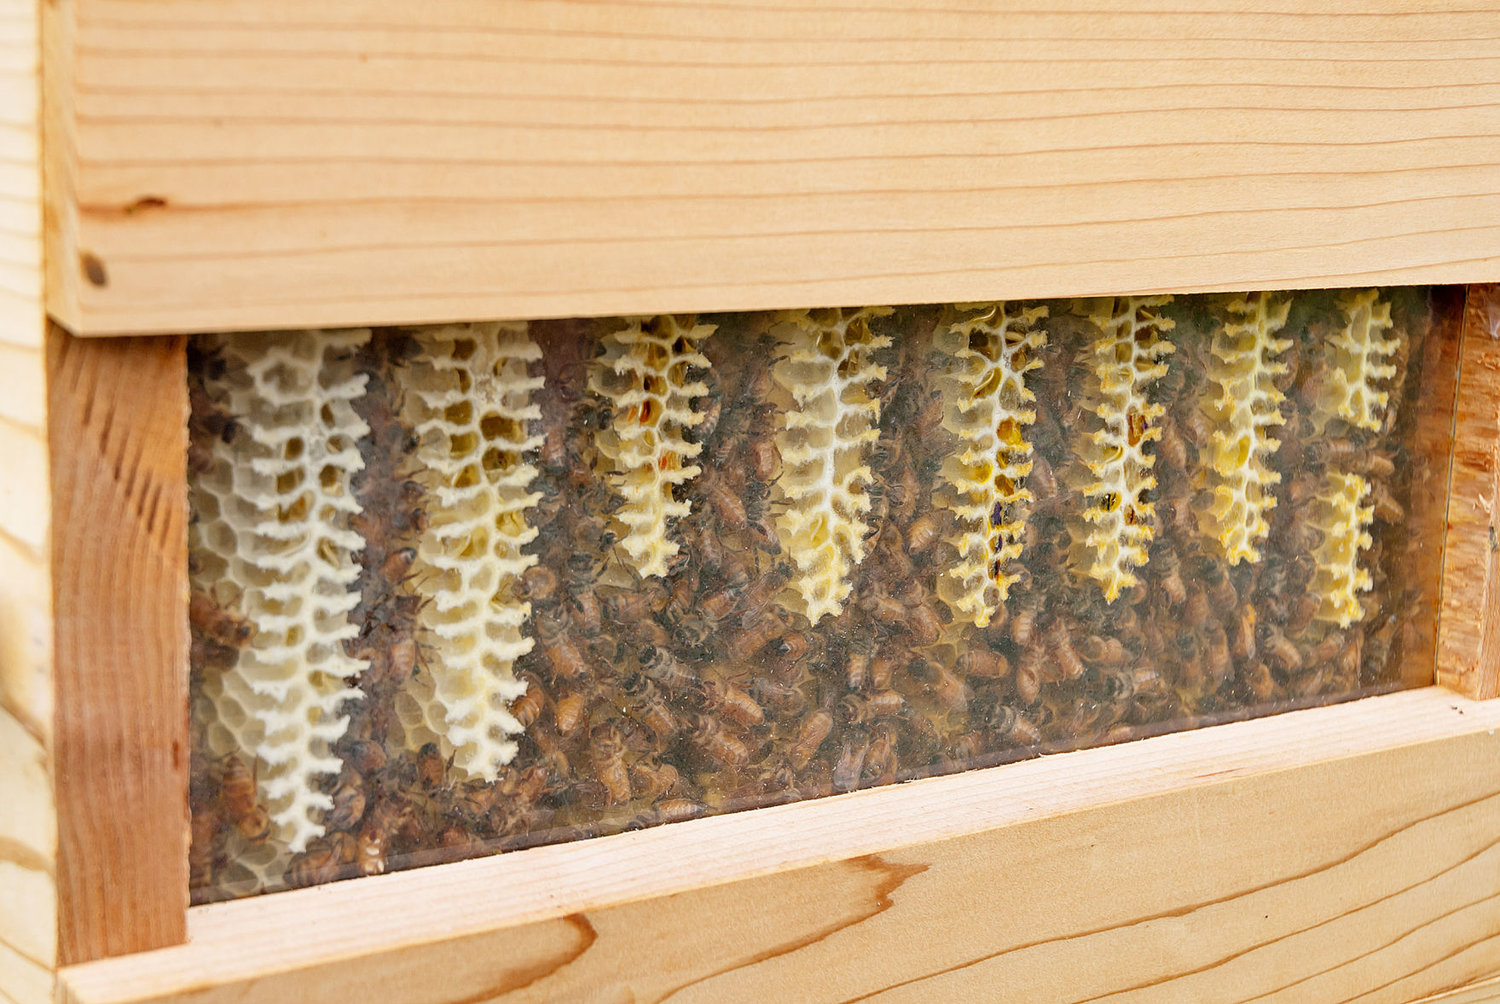 A window in one of the school’s four beehives allows students to watch the bees work to create honeycomb. Photo by Chris Tucker